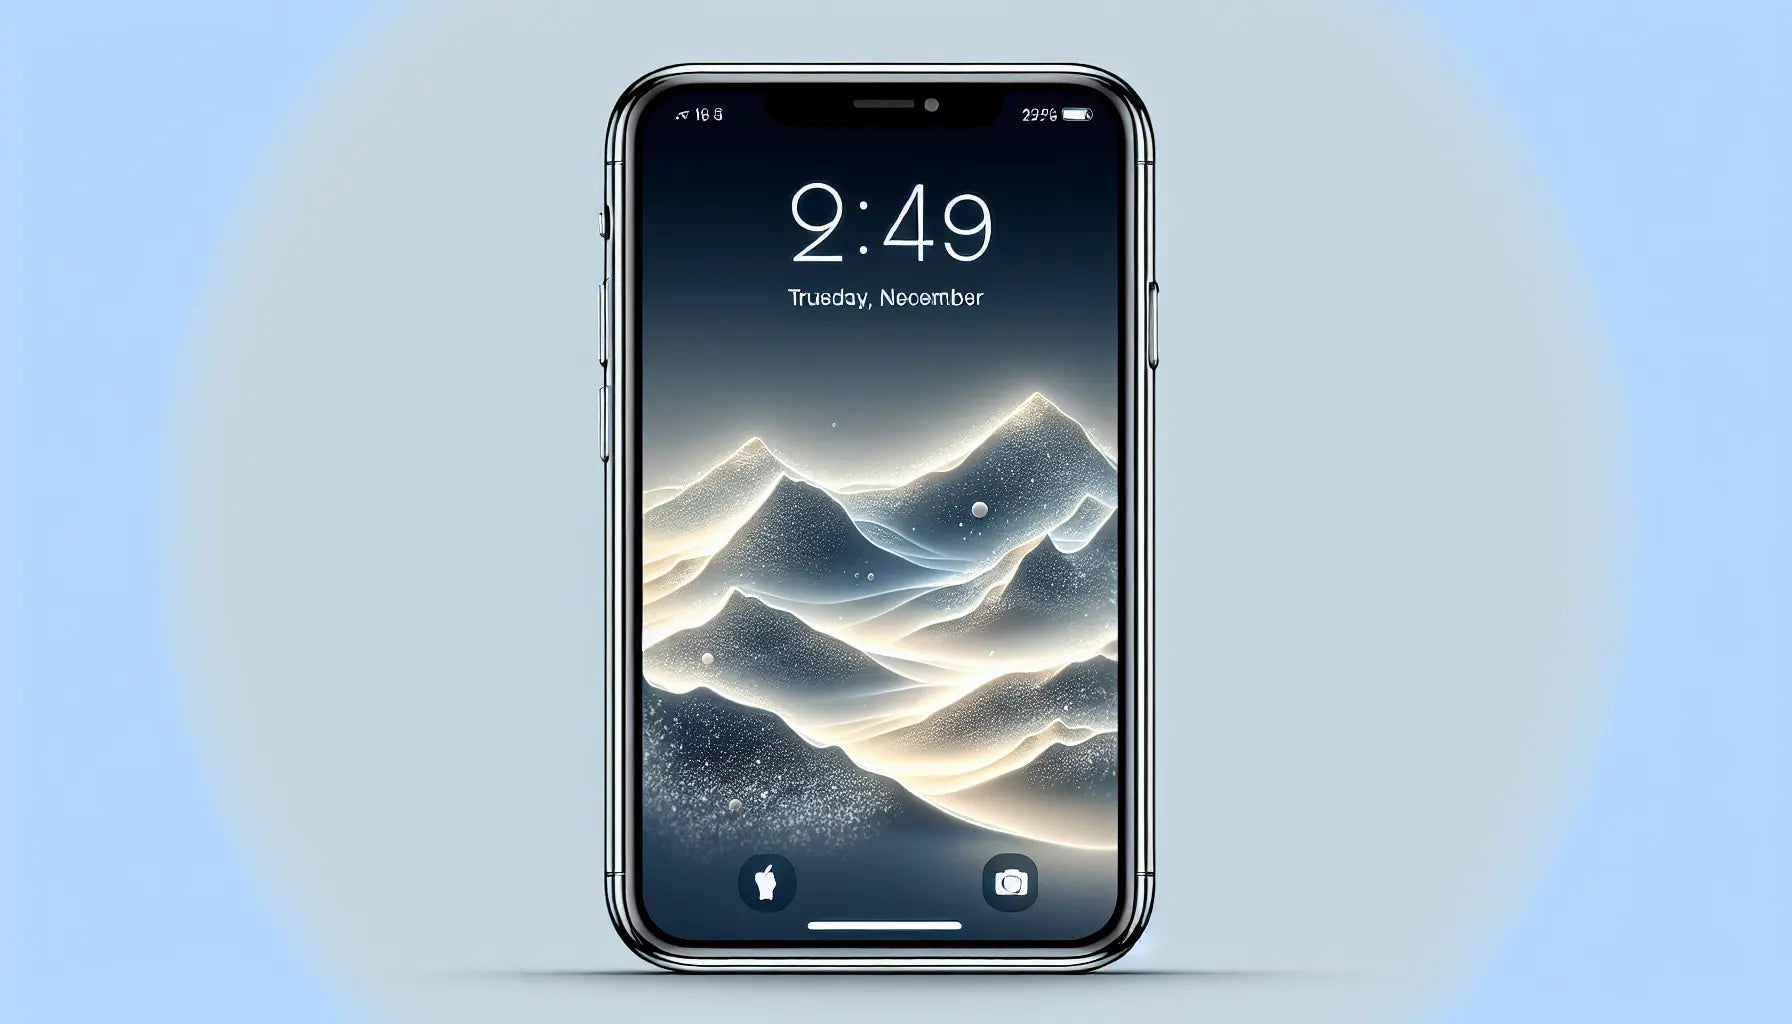 iOS 18: New Design Rumors and Speculations